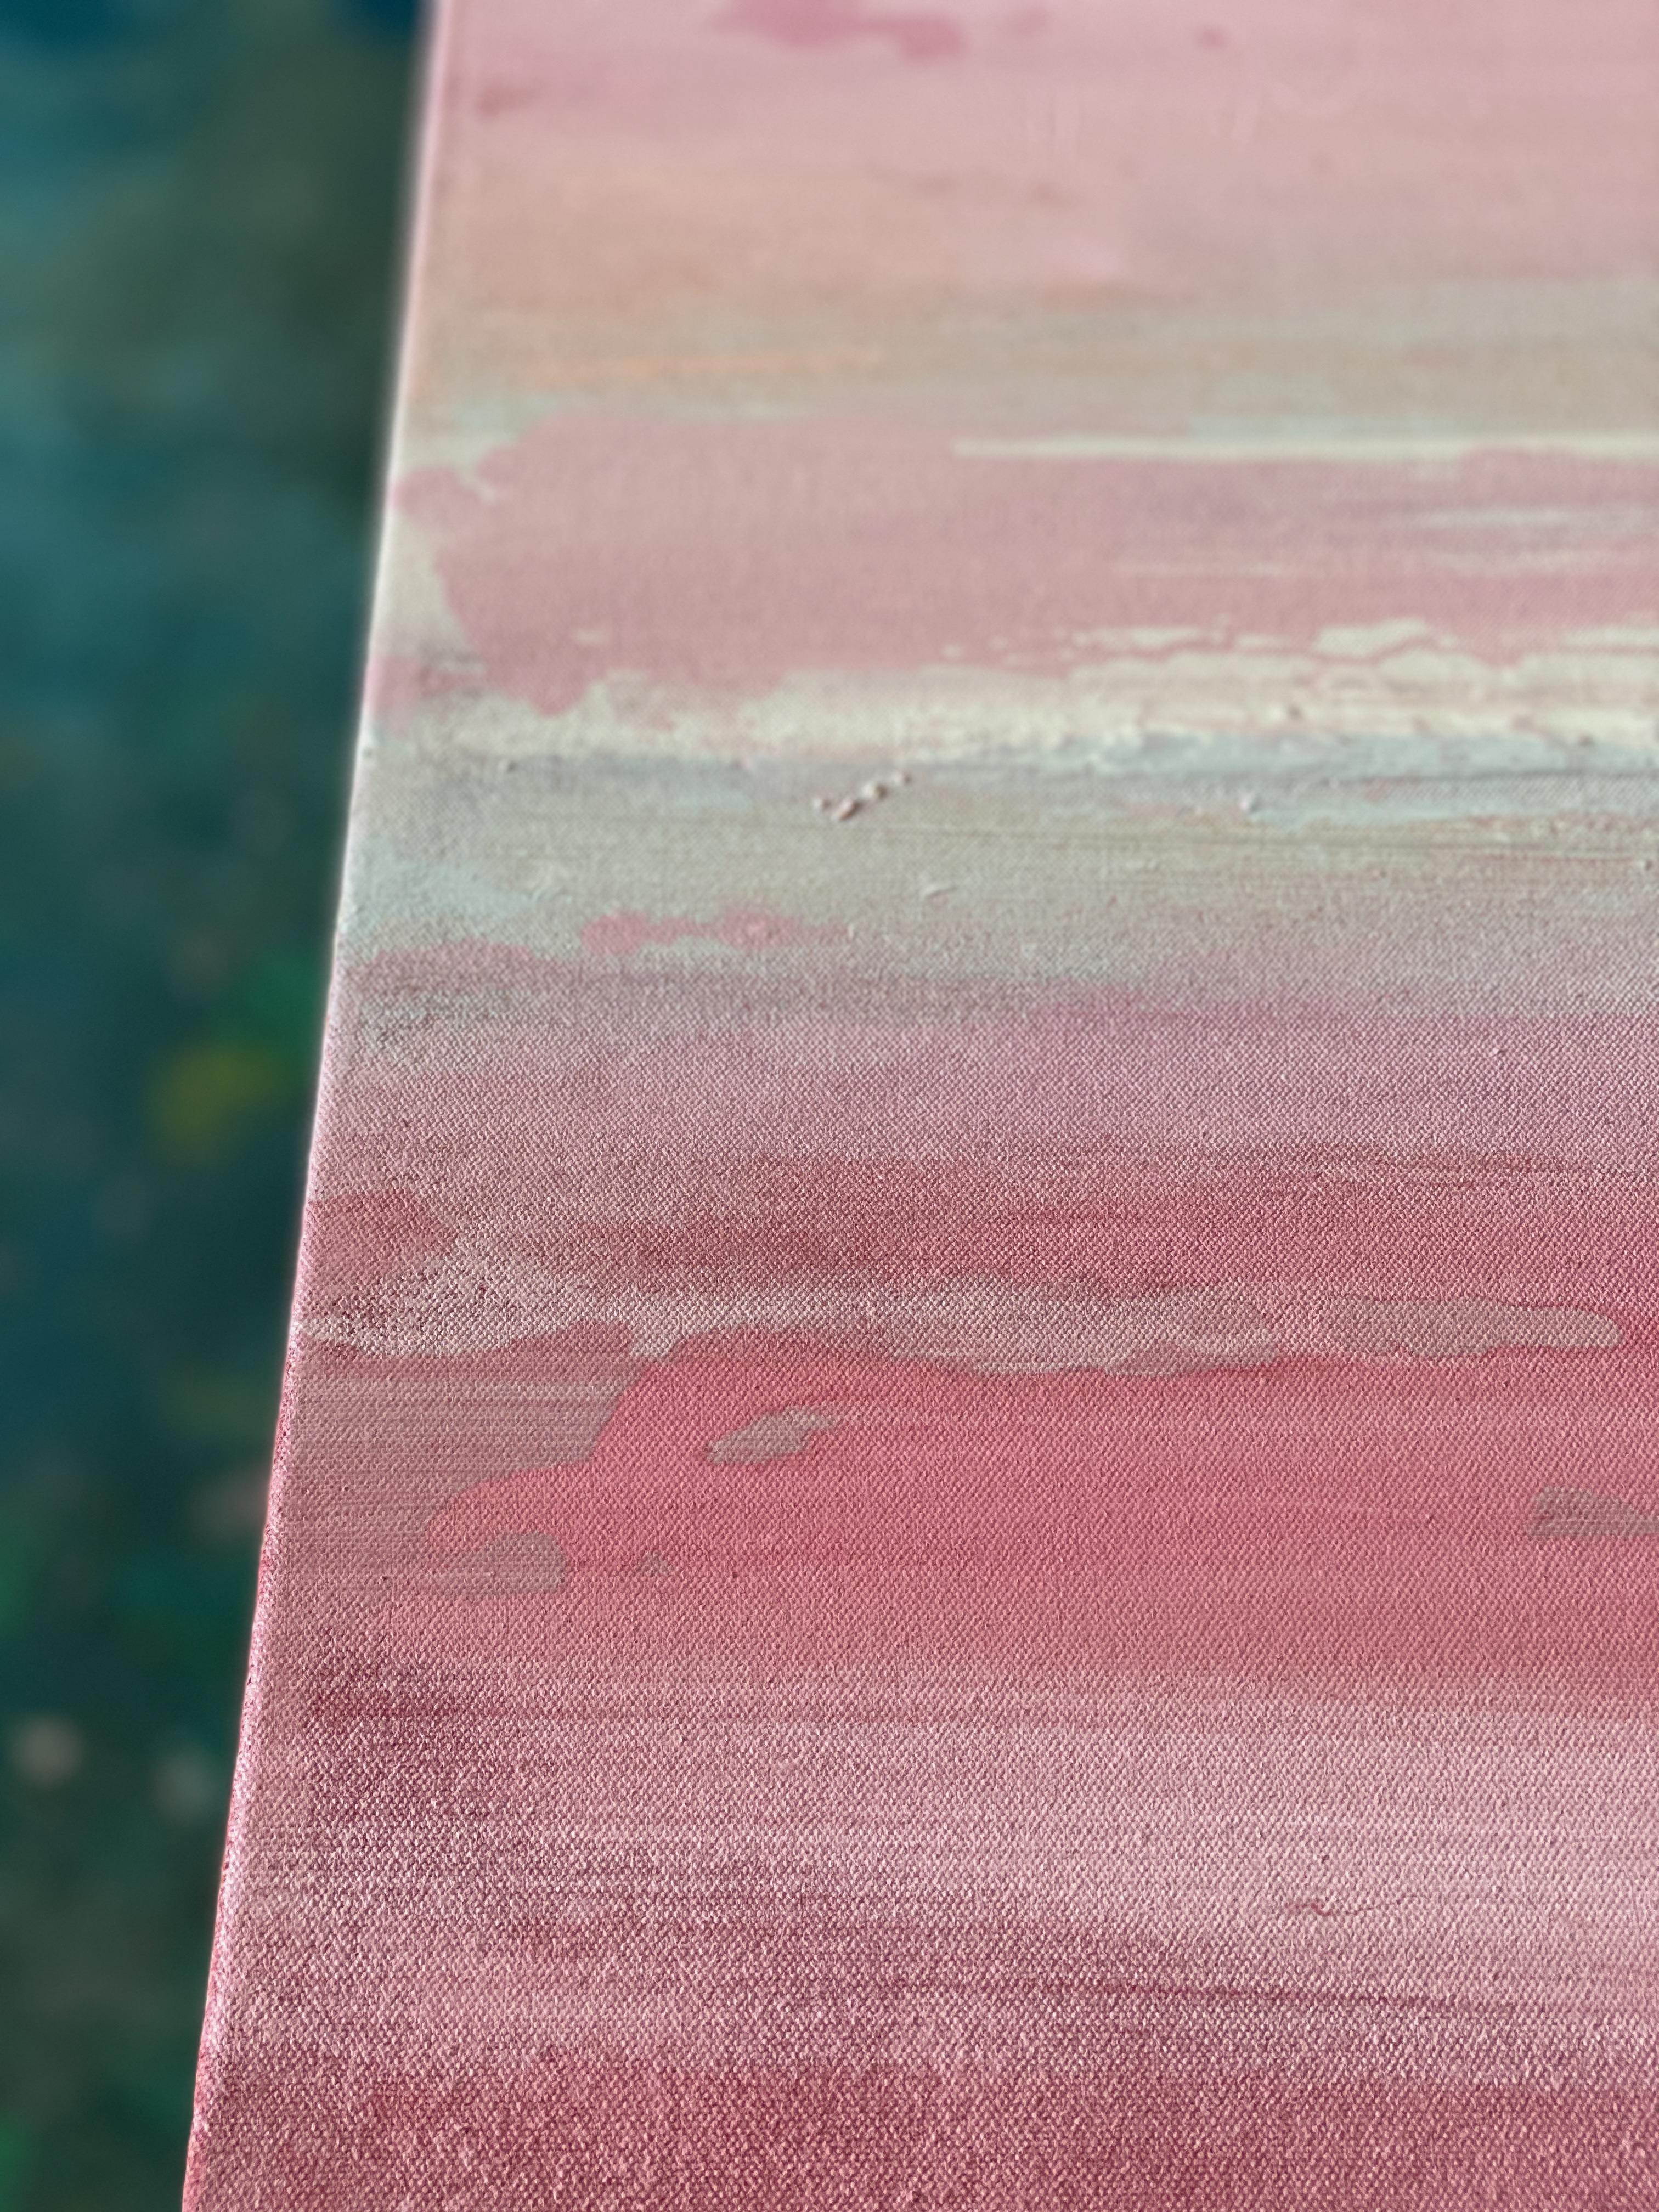 'Calm' Present Moment Collection

Emanating light, energy and movement, this is large dynamic minimalist abstract is painted in colours of yellow and pastel pink, mist and white. Layered paint reveal descriptive textures, delicate details, thick